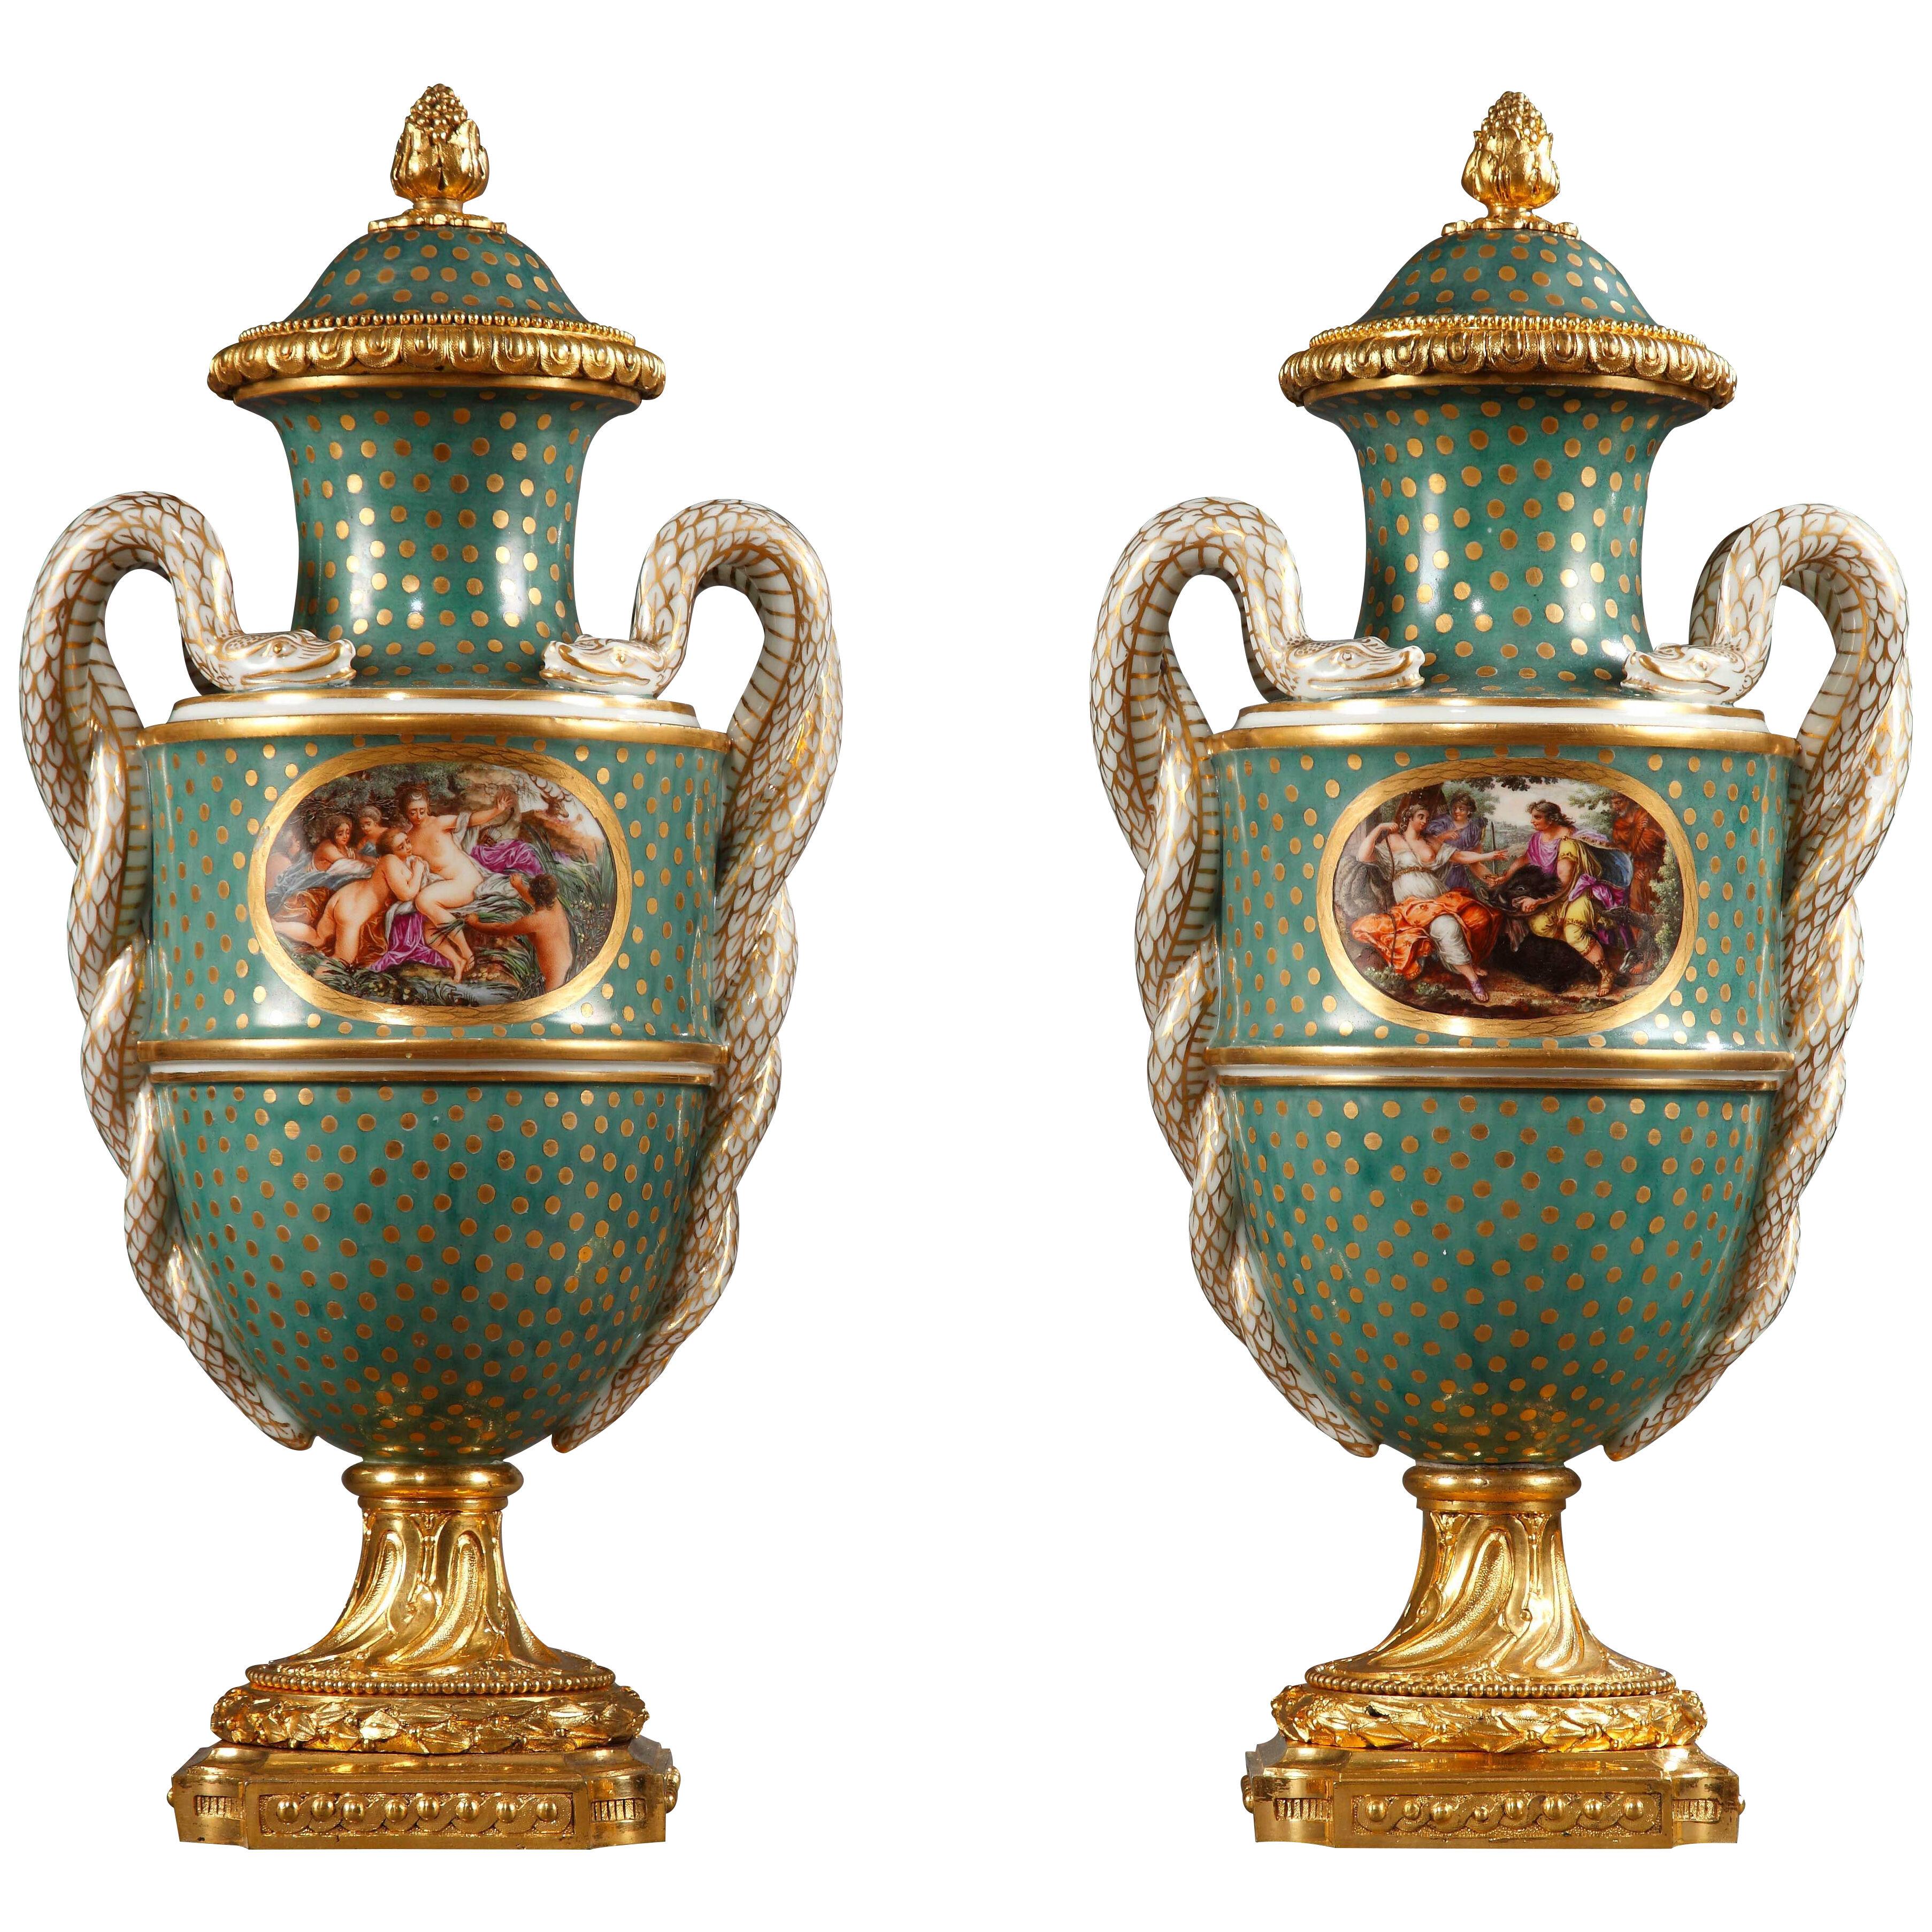 Pair of Louis XVI Style Covered Vases Attributed to Samson & Cie, France, c.1890